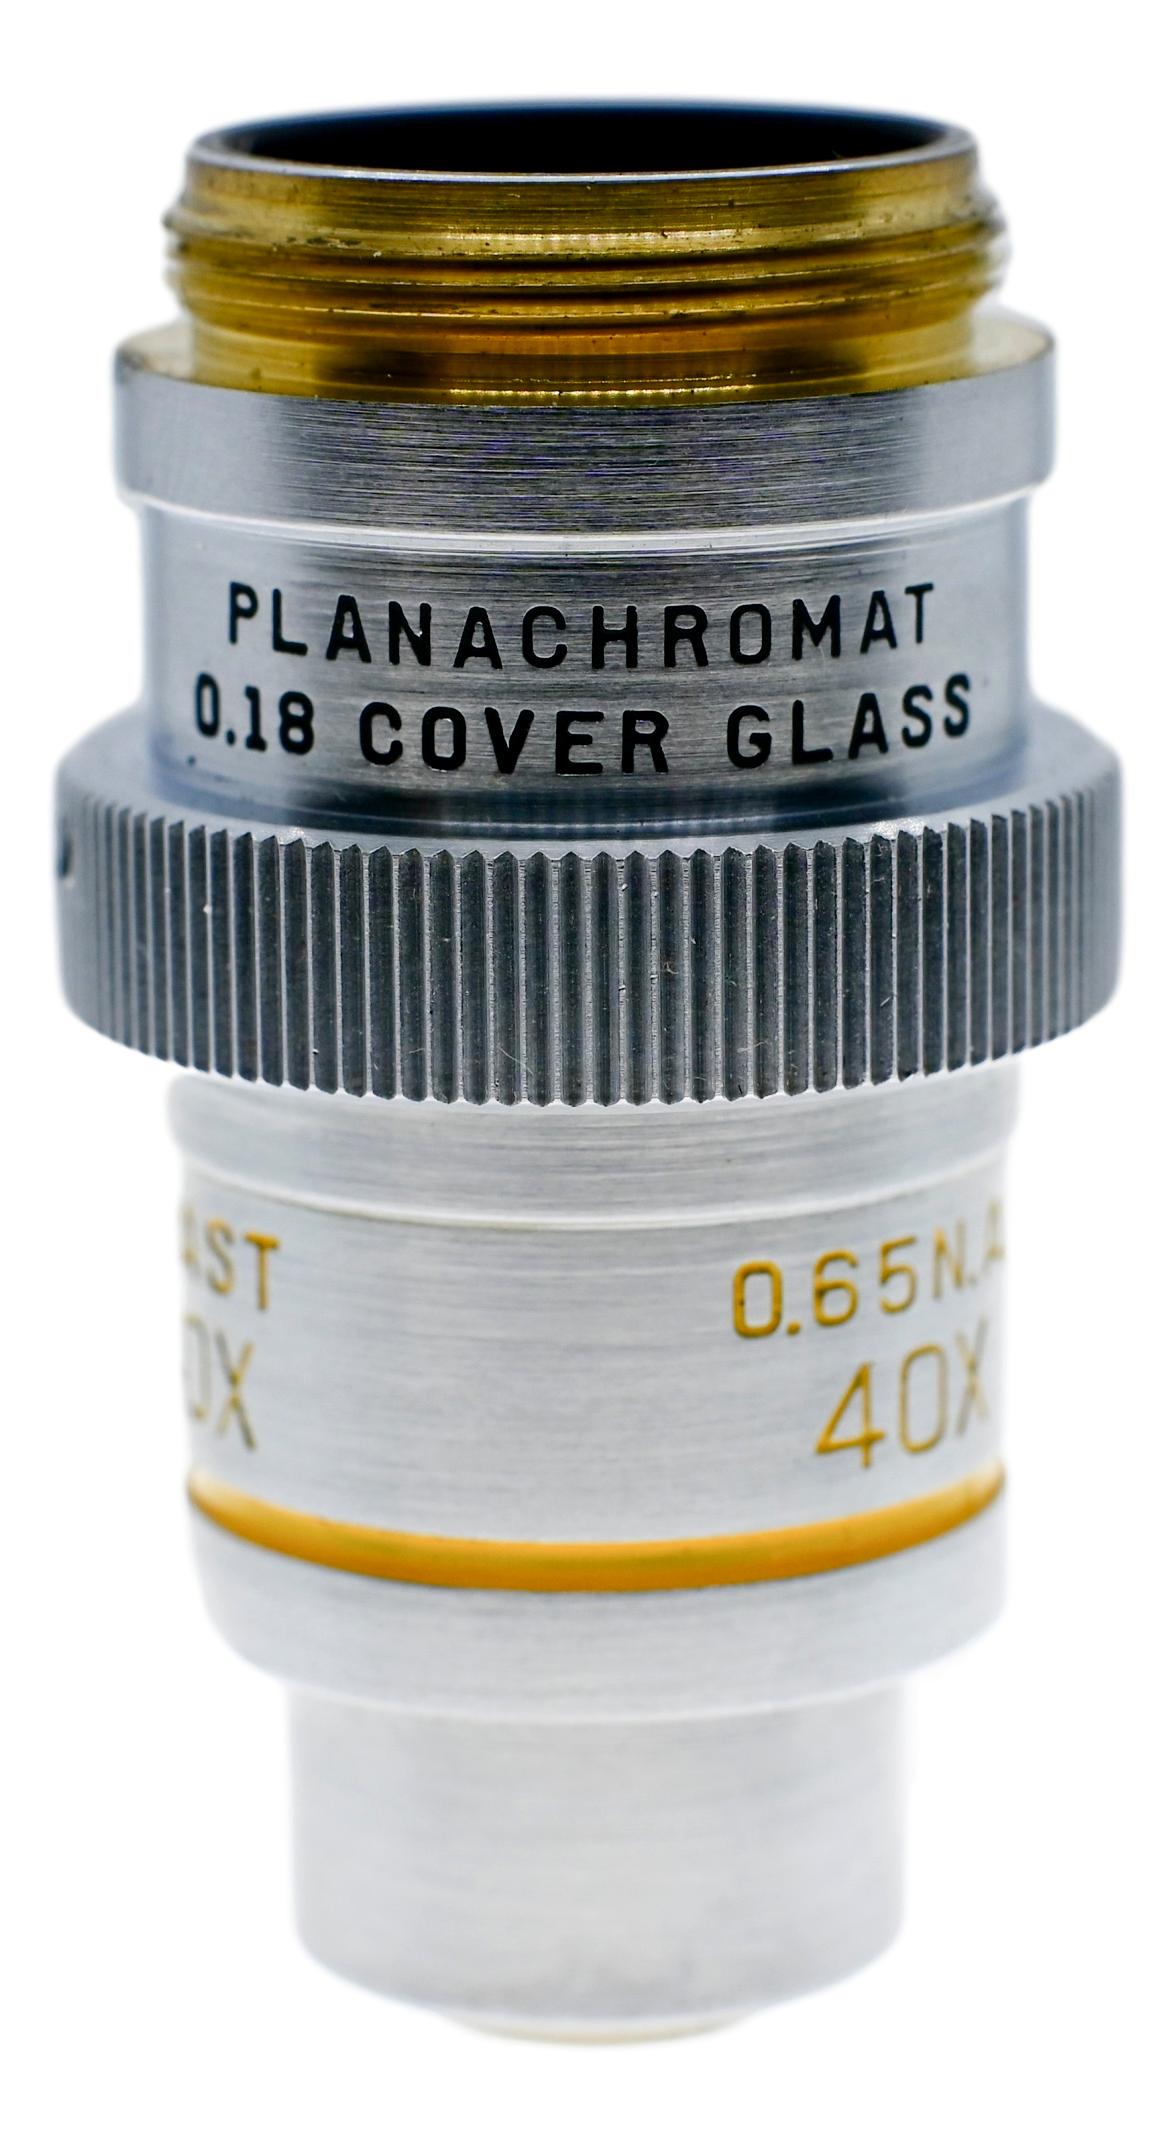 Bausch & Lomb 40x Phase Contrast Plan Achromat Objective